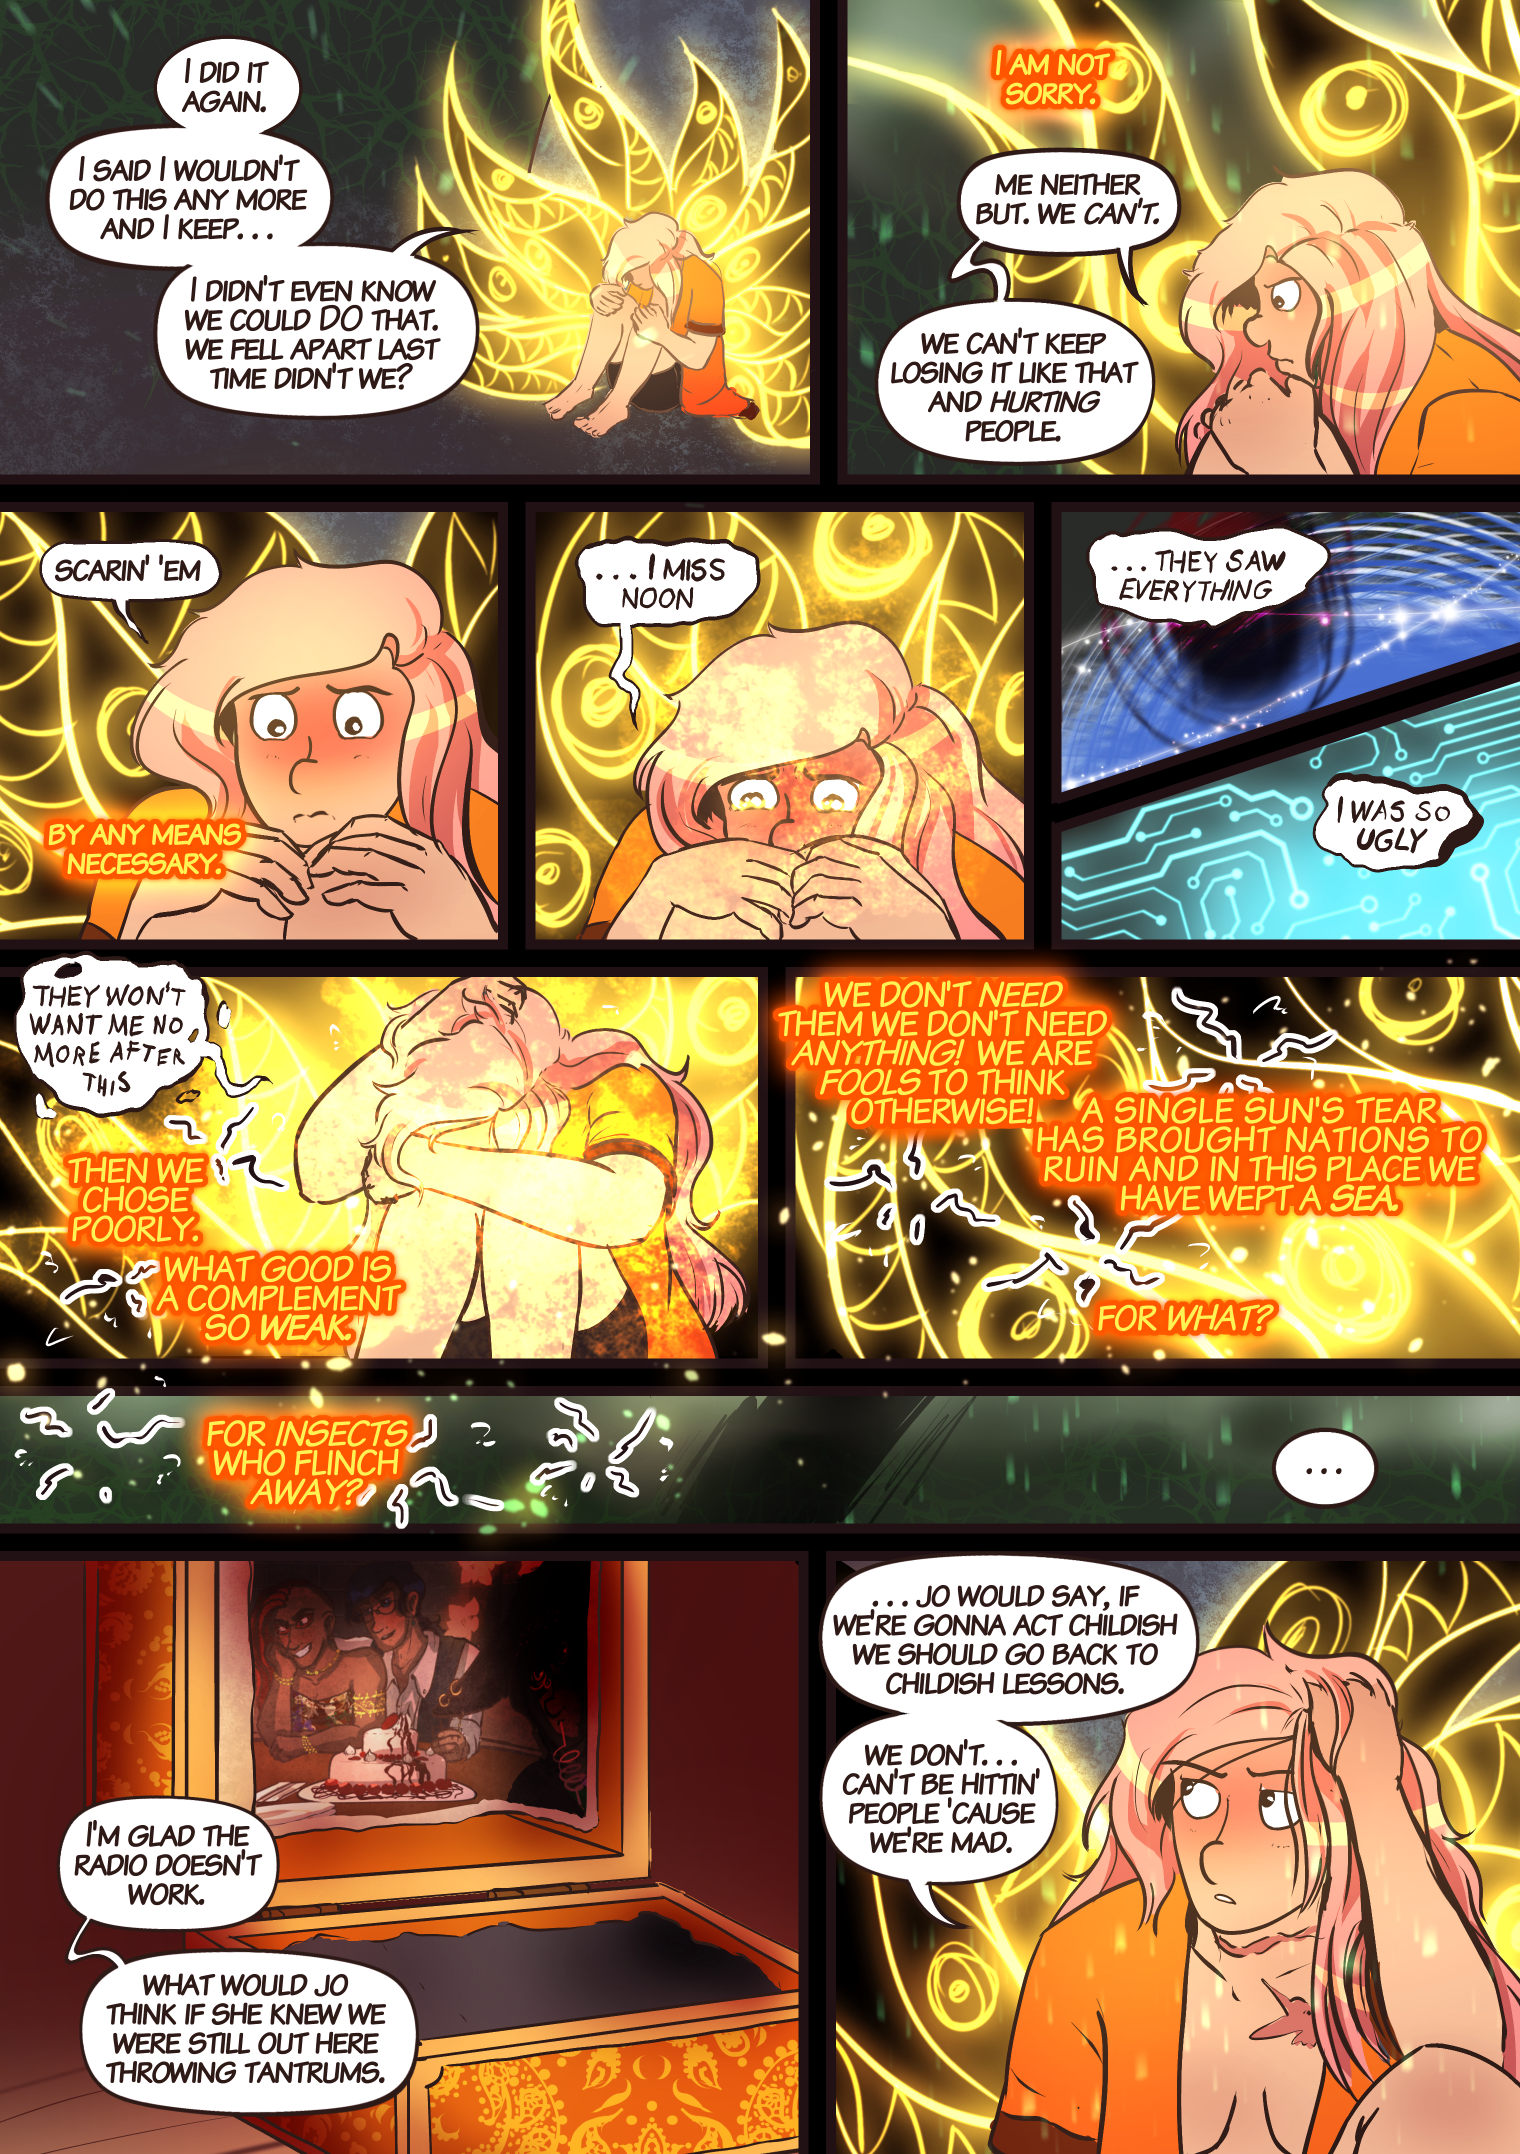 by my math, this is the 800th canon comic page of kidd commander. Thanks very much for reading